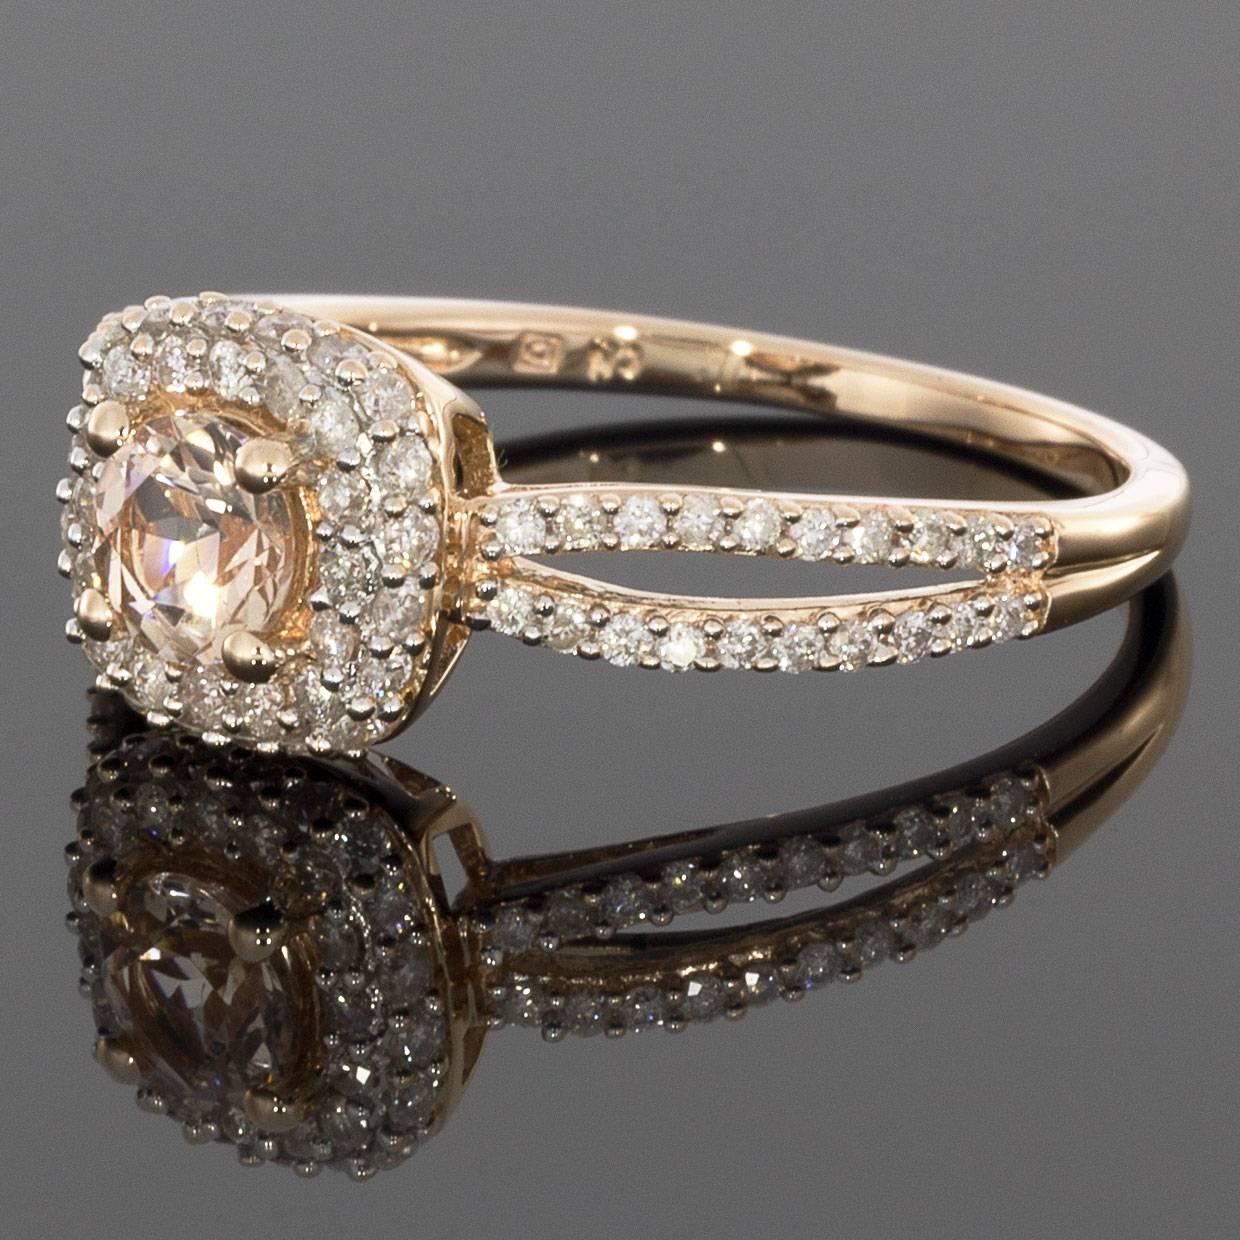 This beautiful engagement ring features a morganite gemstone surrounded by a halo of diamonds. The gemstones are set in rose gold to accent the morganite's light pink color. This stunning ring is sure to catch everyone's attention! MSRP